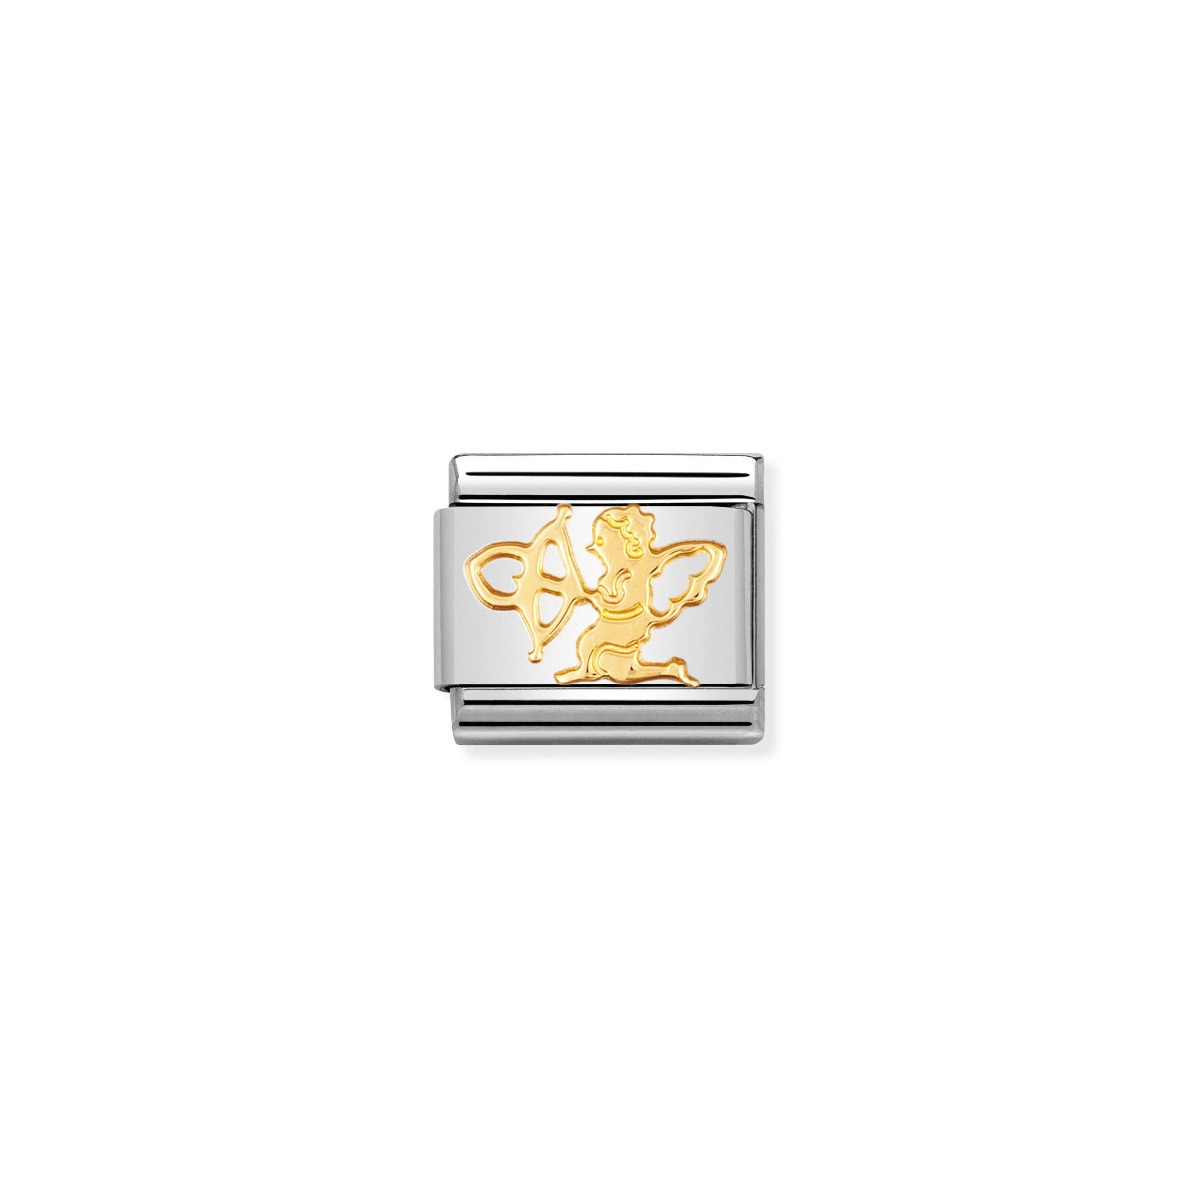 Nomination Classic Cupid Charm - 18k Gold - 030116/07